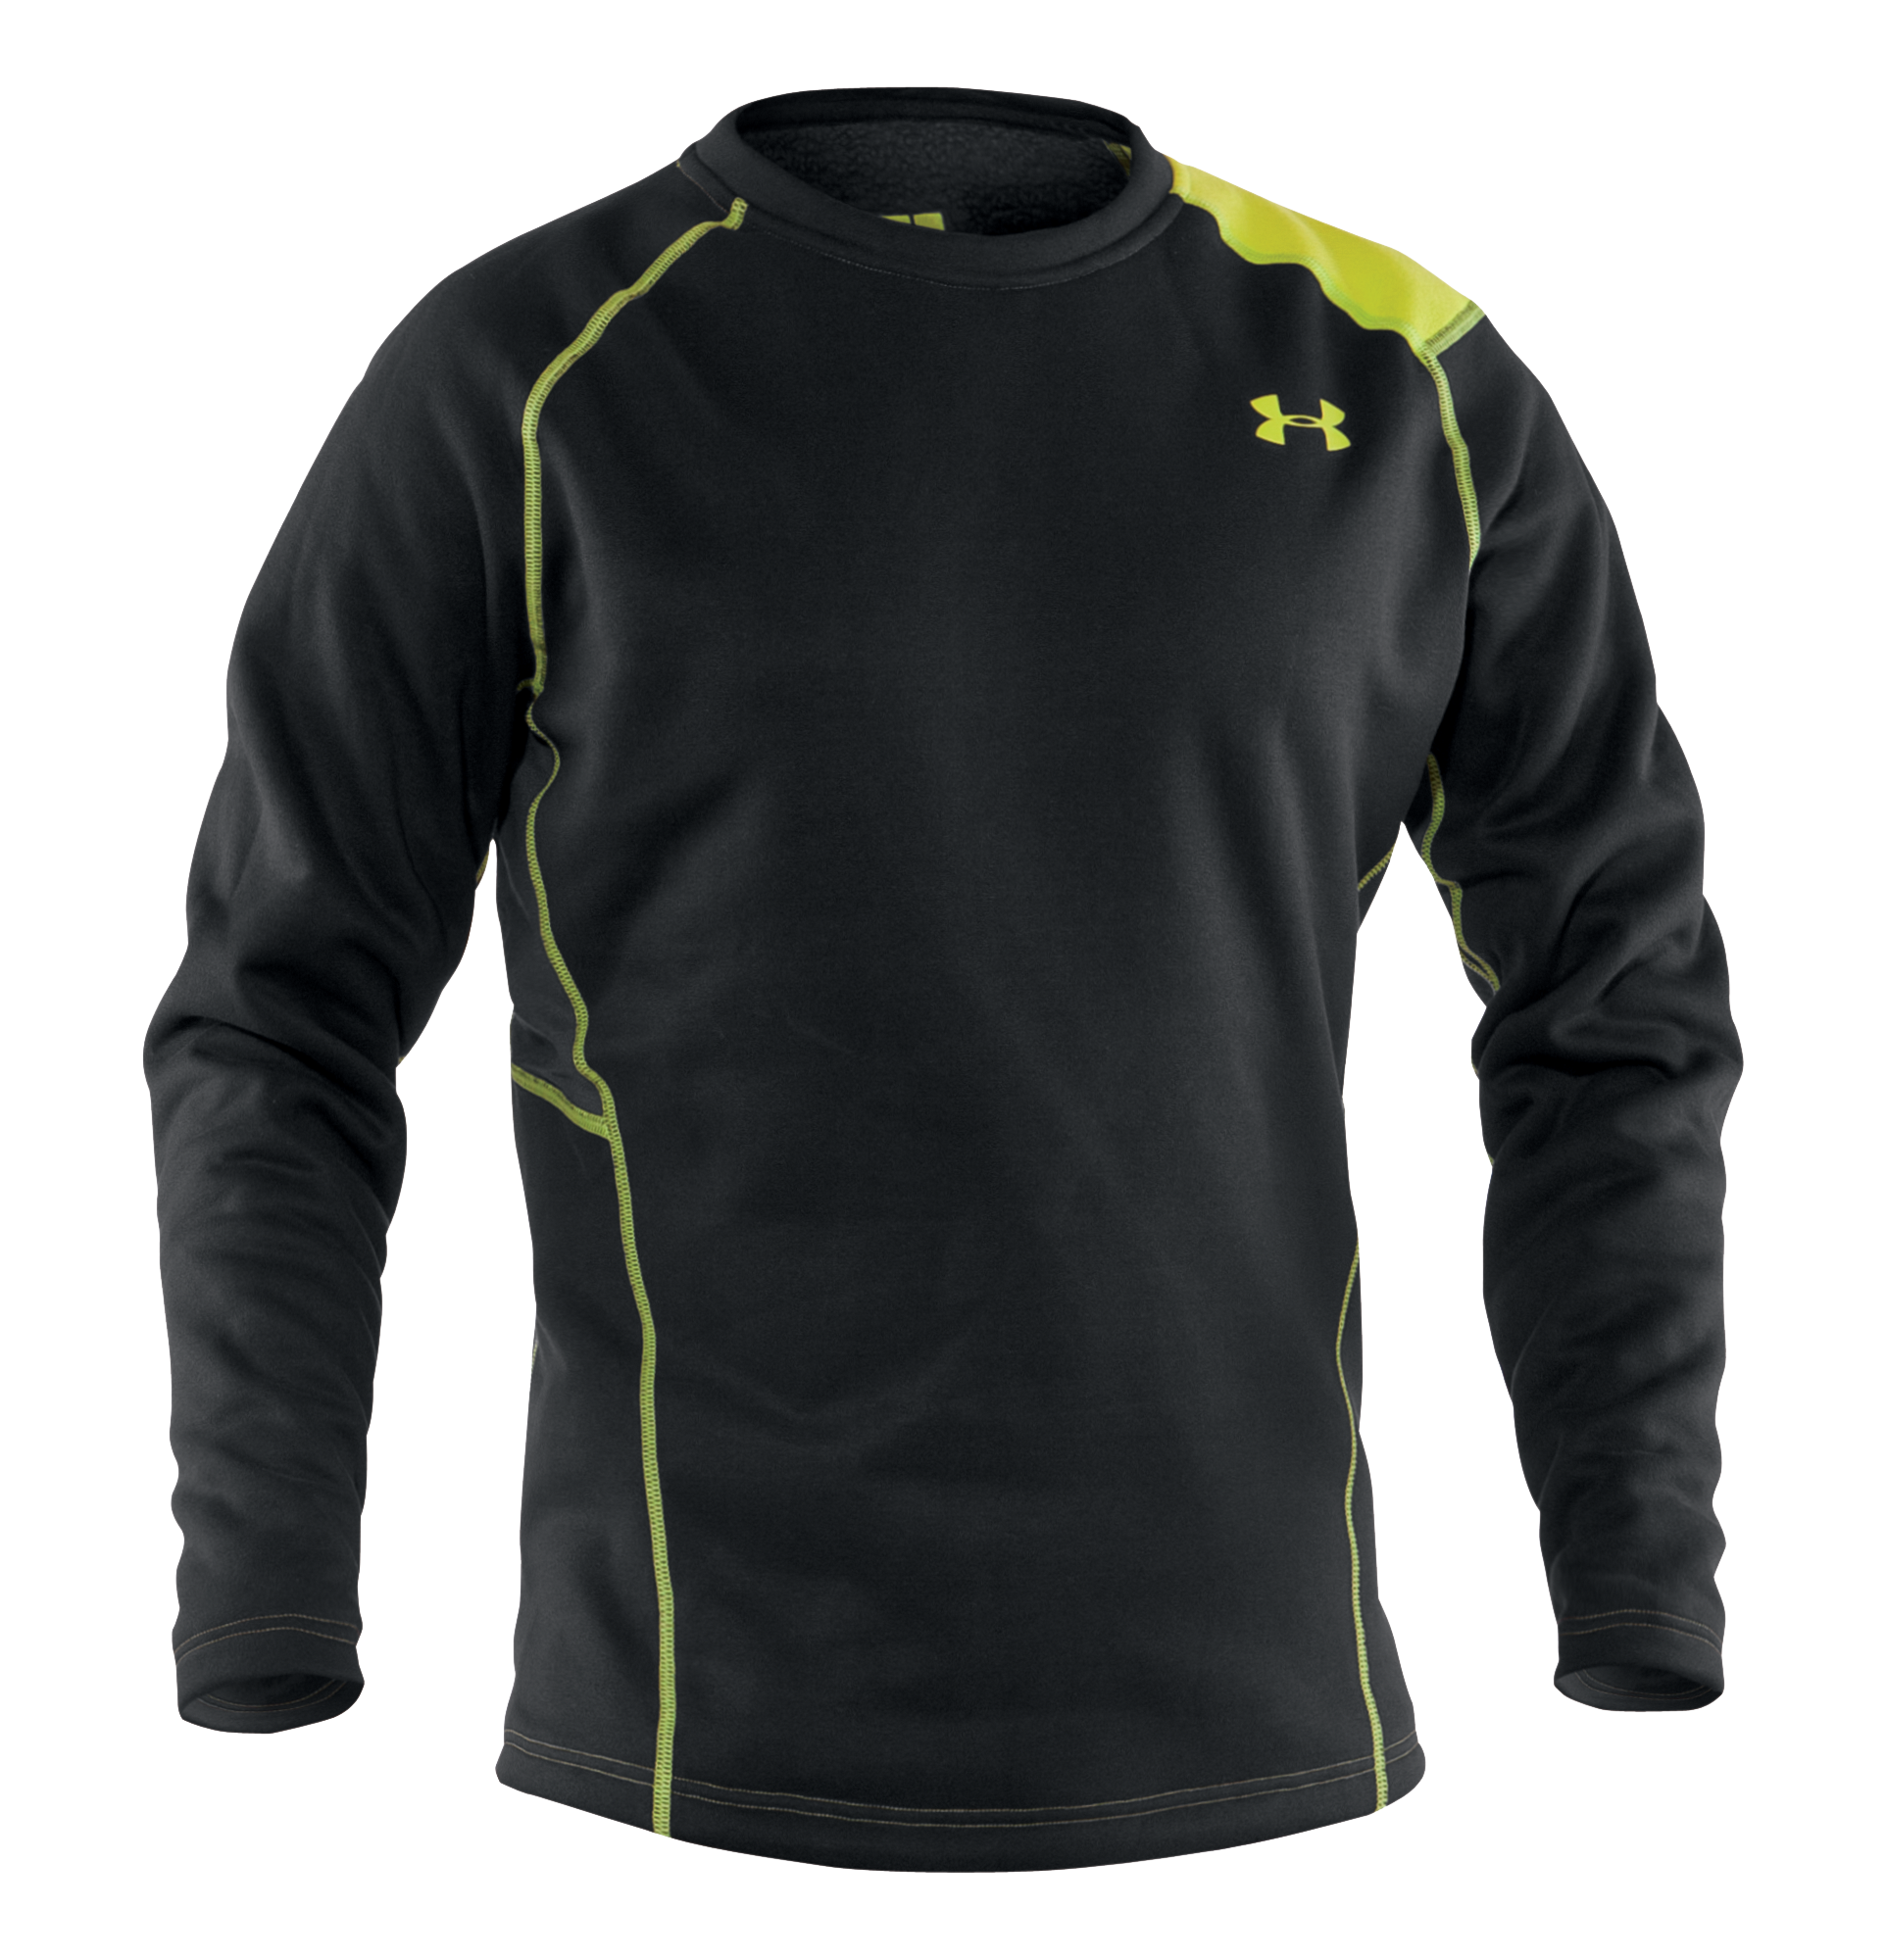 Men's Long Sleeve Base Layer Shirt Scent Control